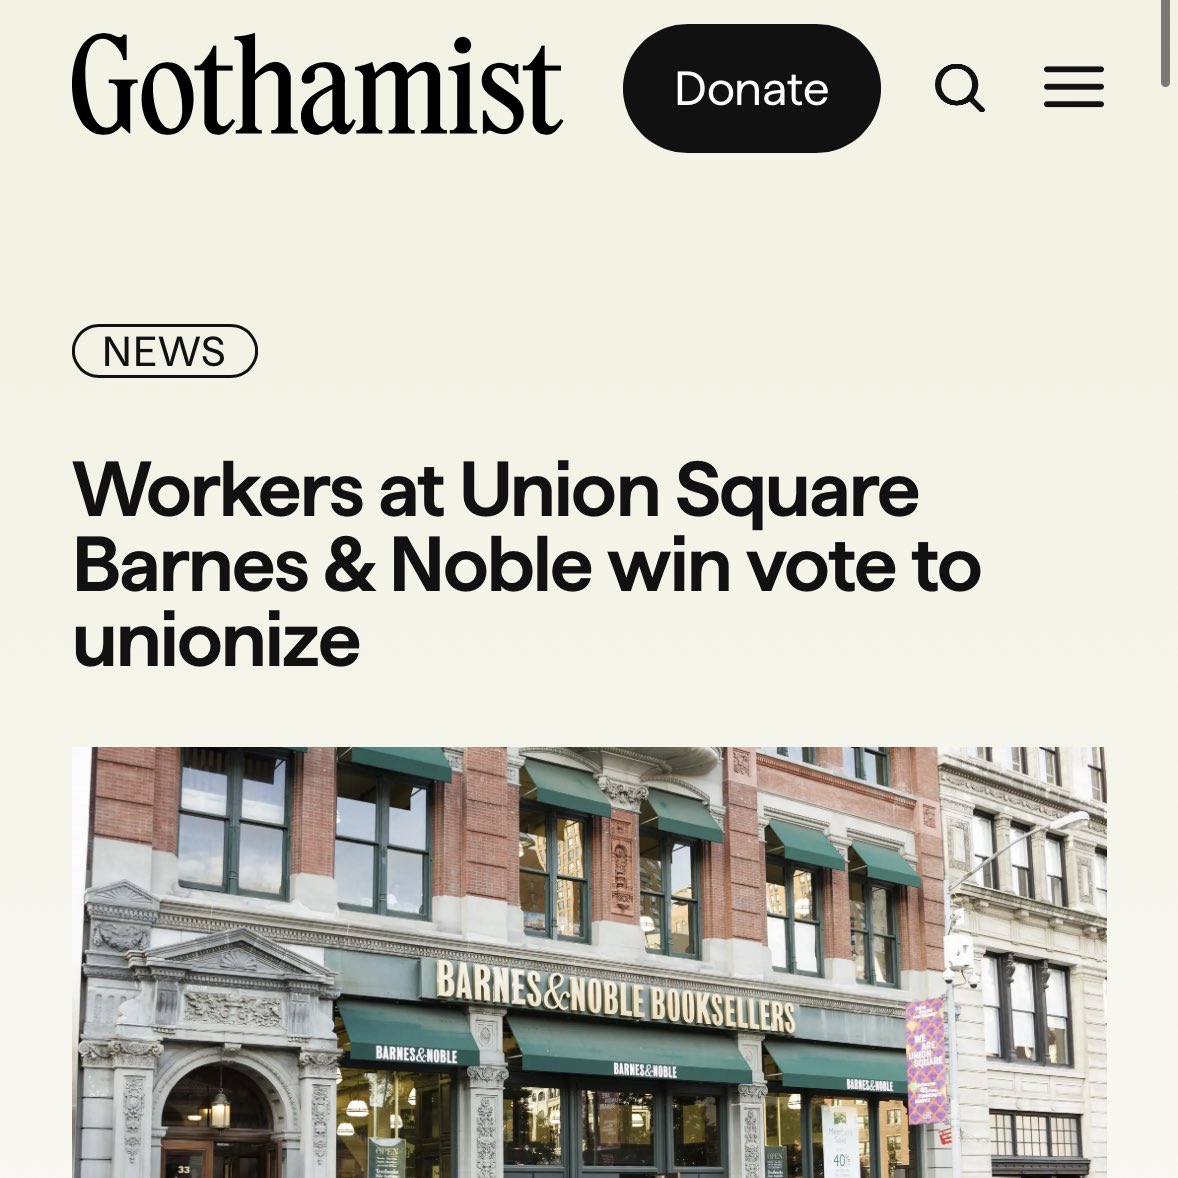 Evening read brought to you by @bnusqunion @Gothamist gothamist.com/news/workers-a…